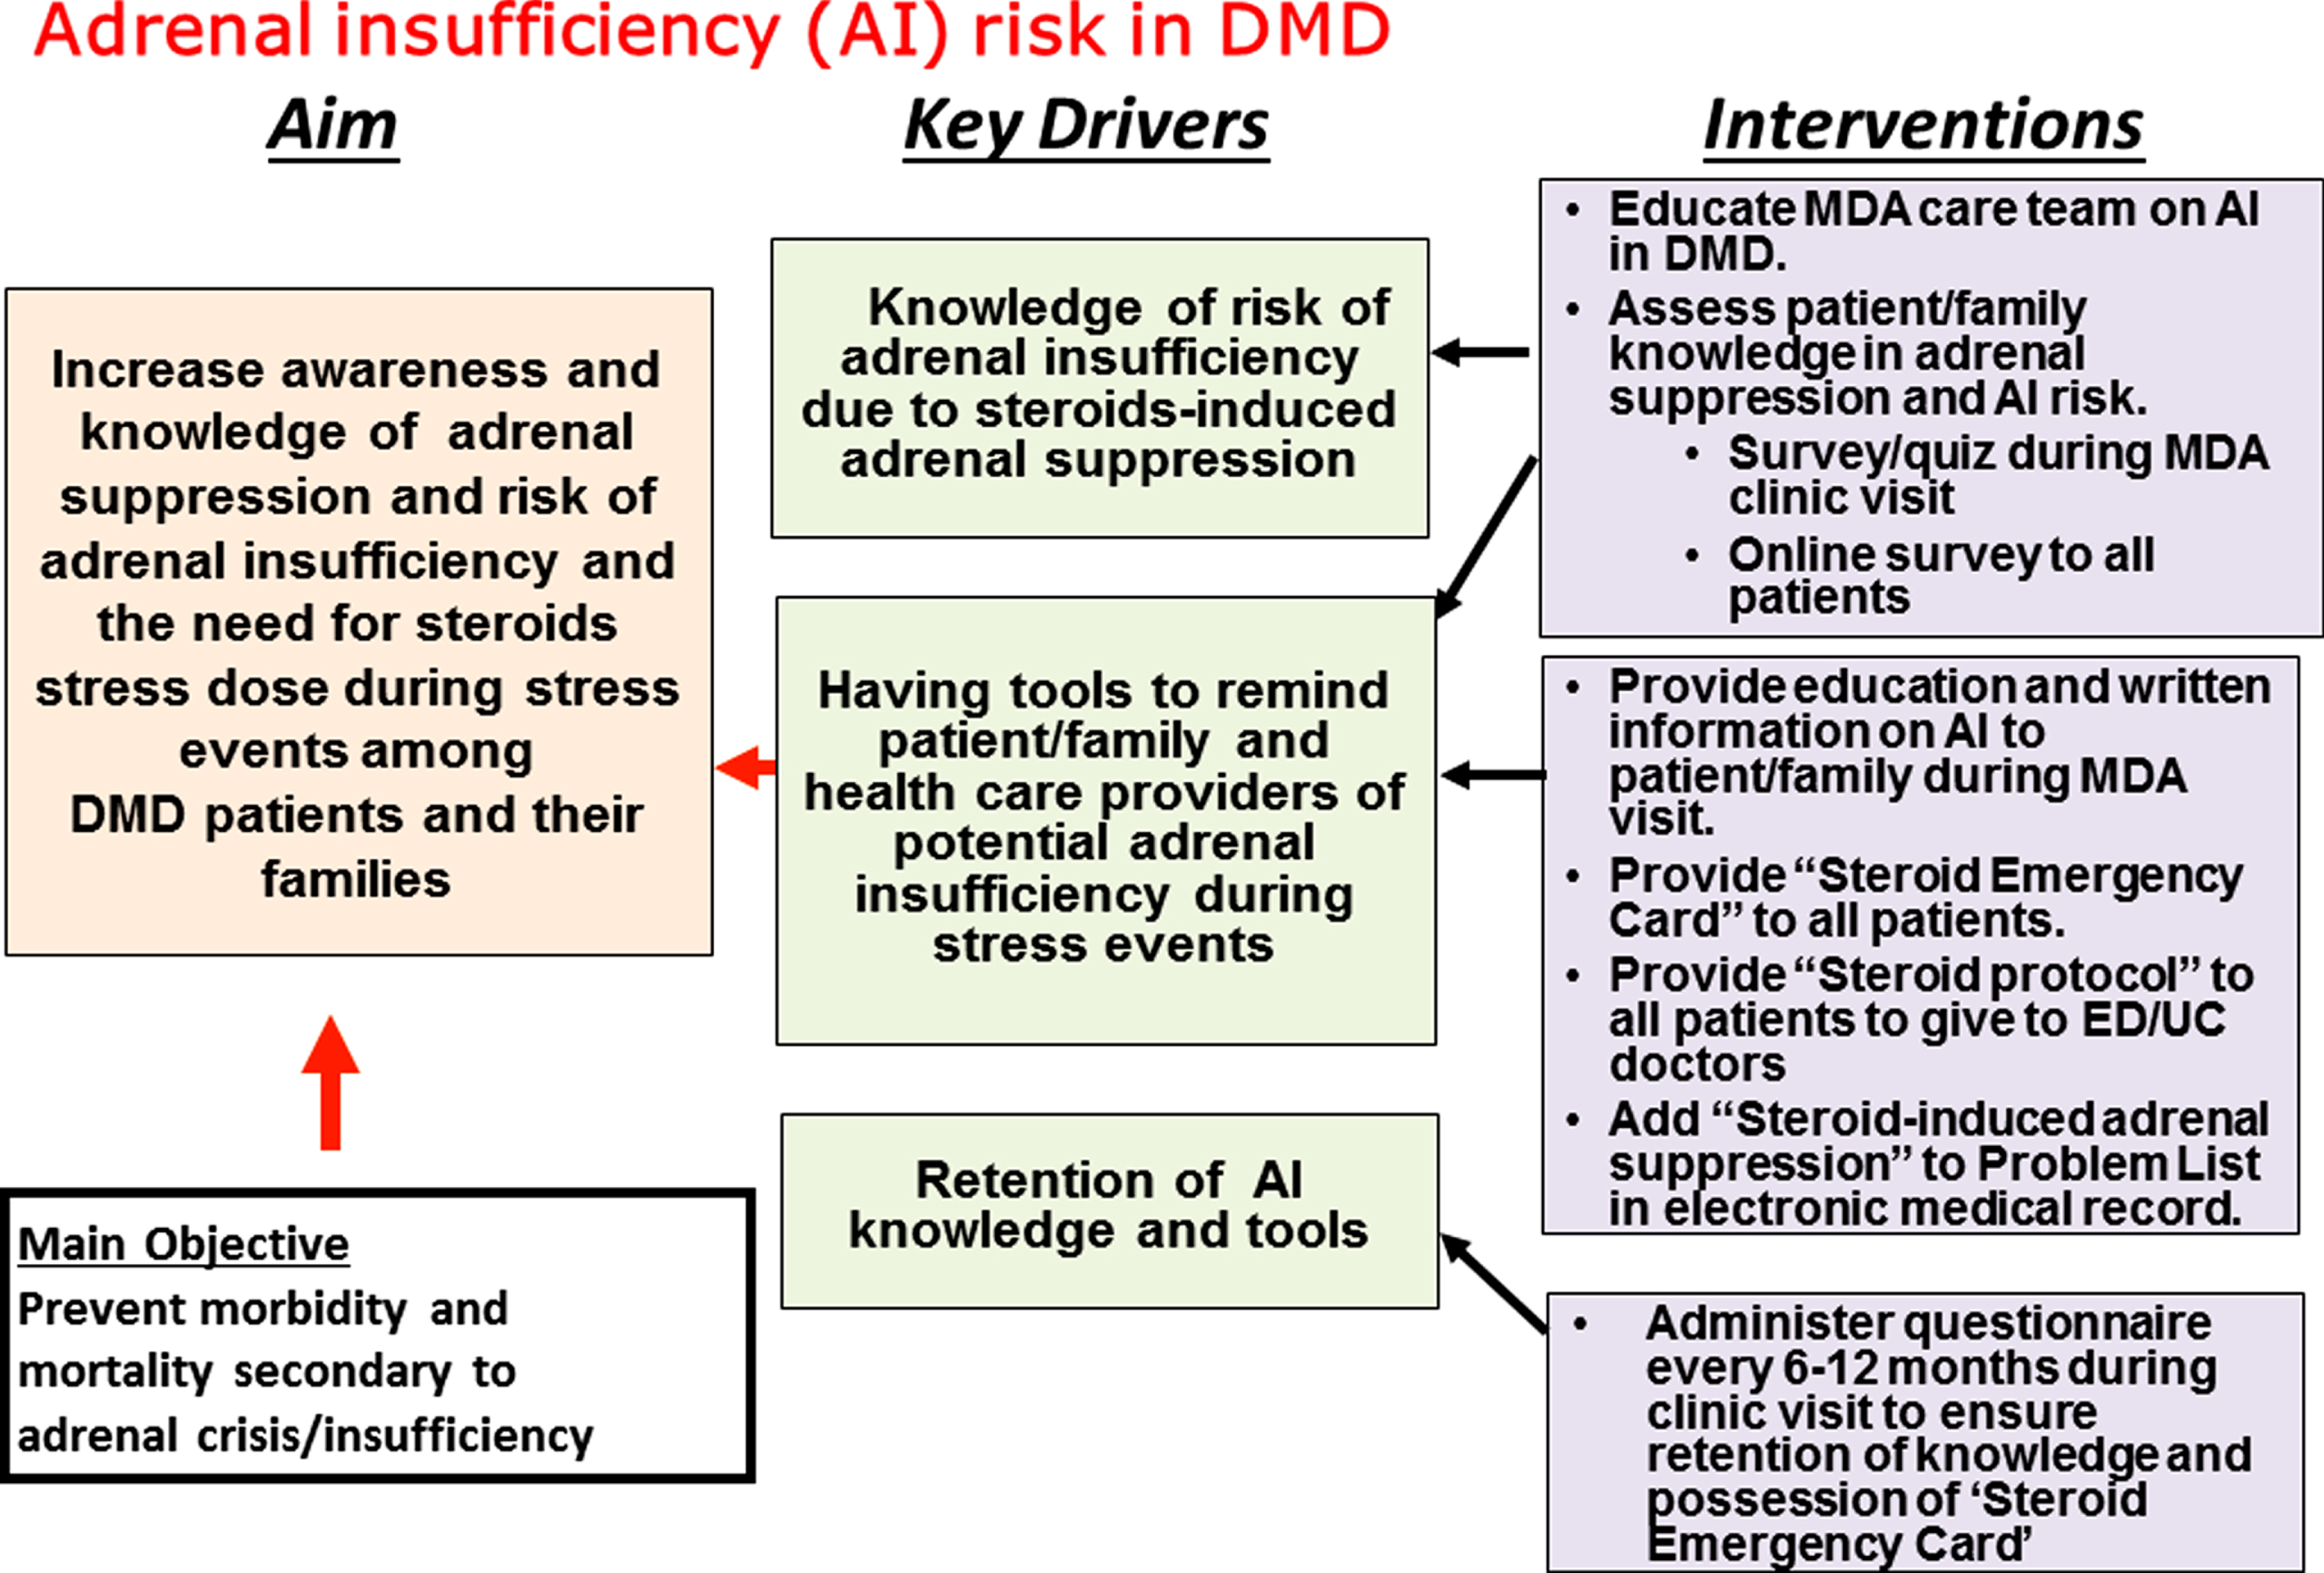 Key drivers for our quality-improvement project. Shown is the learning structure including the aim statement, key drivers, and the intervention strategies to be implemented to increase awareness of adrenal suppression and risk of adrenal insufficiency or adrenal crisis. The key drivers are the elements believed to be crucial for achieving the aim.